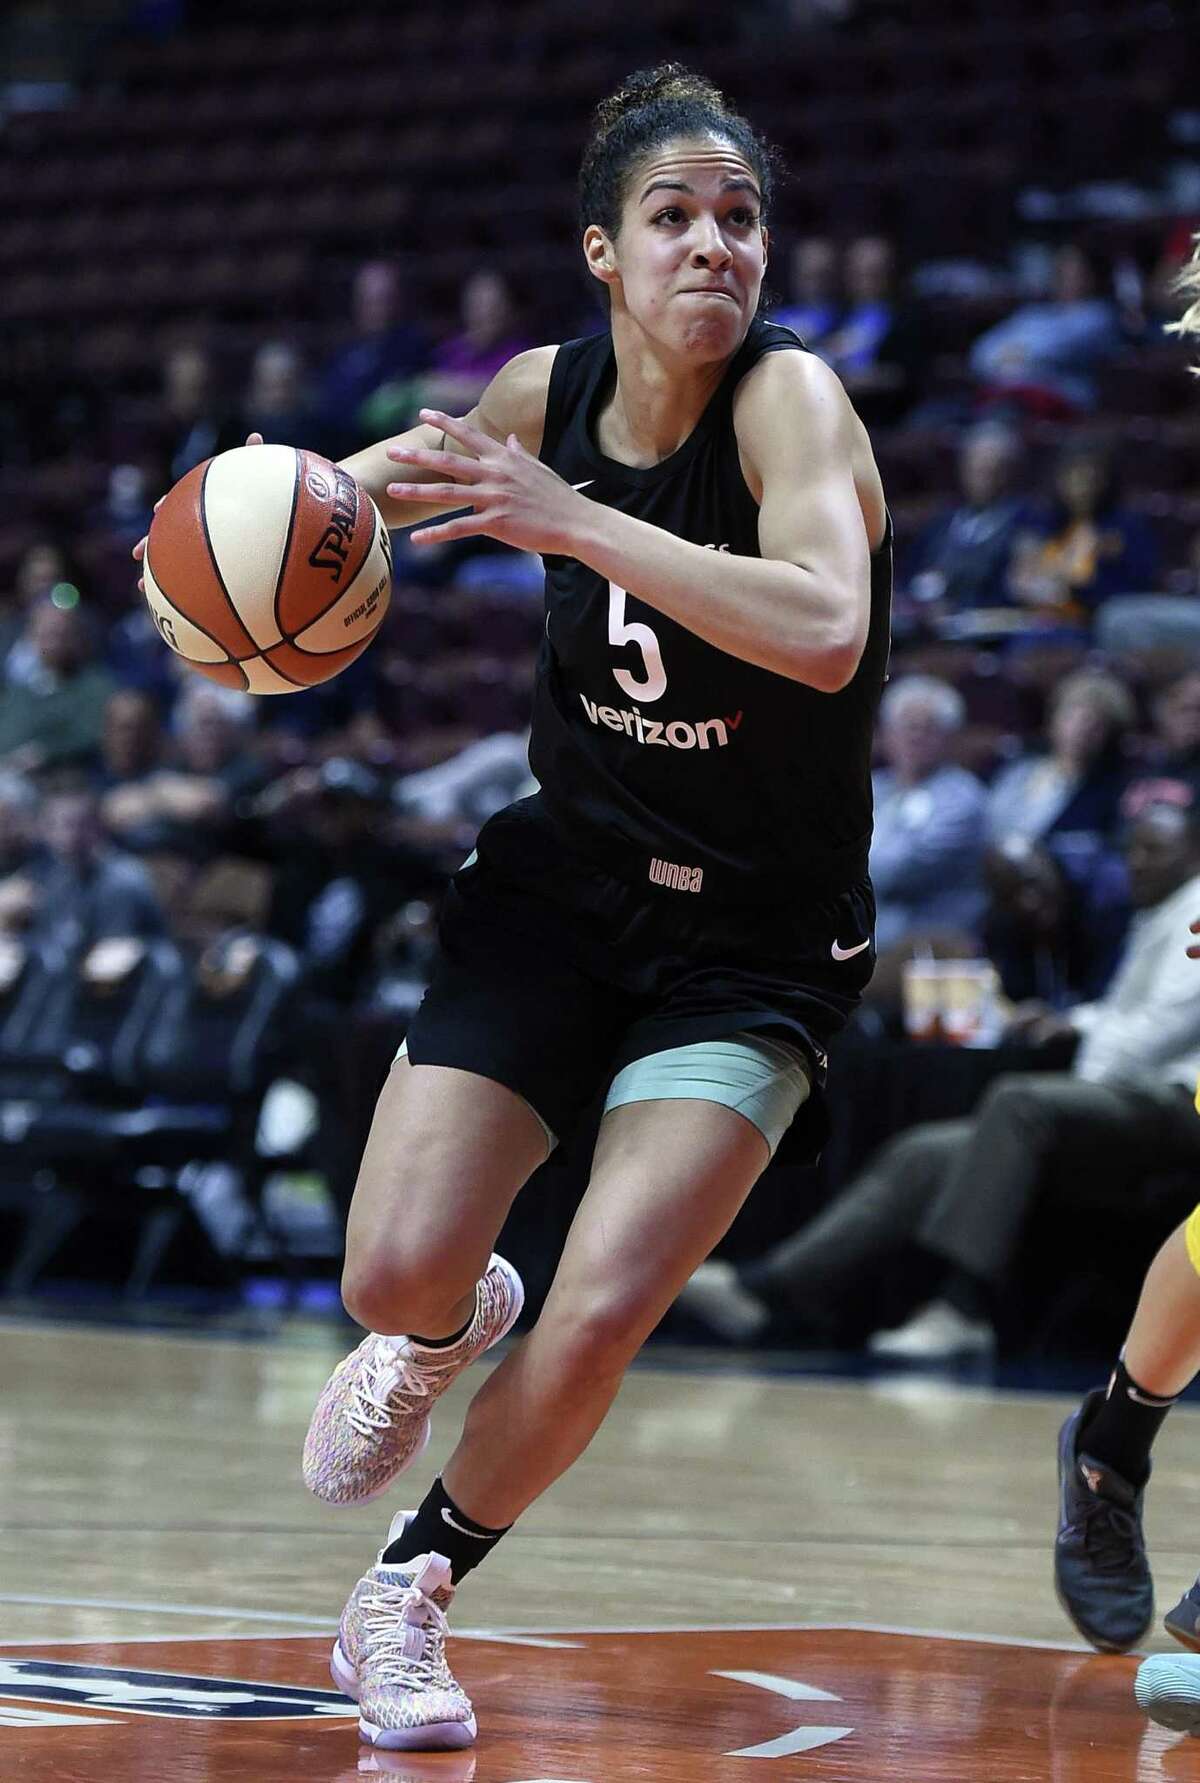 Life after Storrs: UConn family helping Kia Nurse adjust to the WNBA